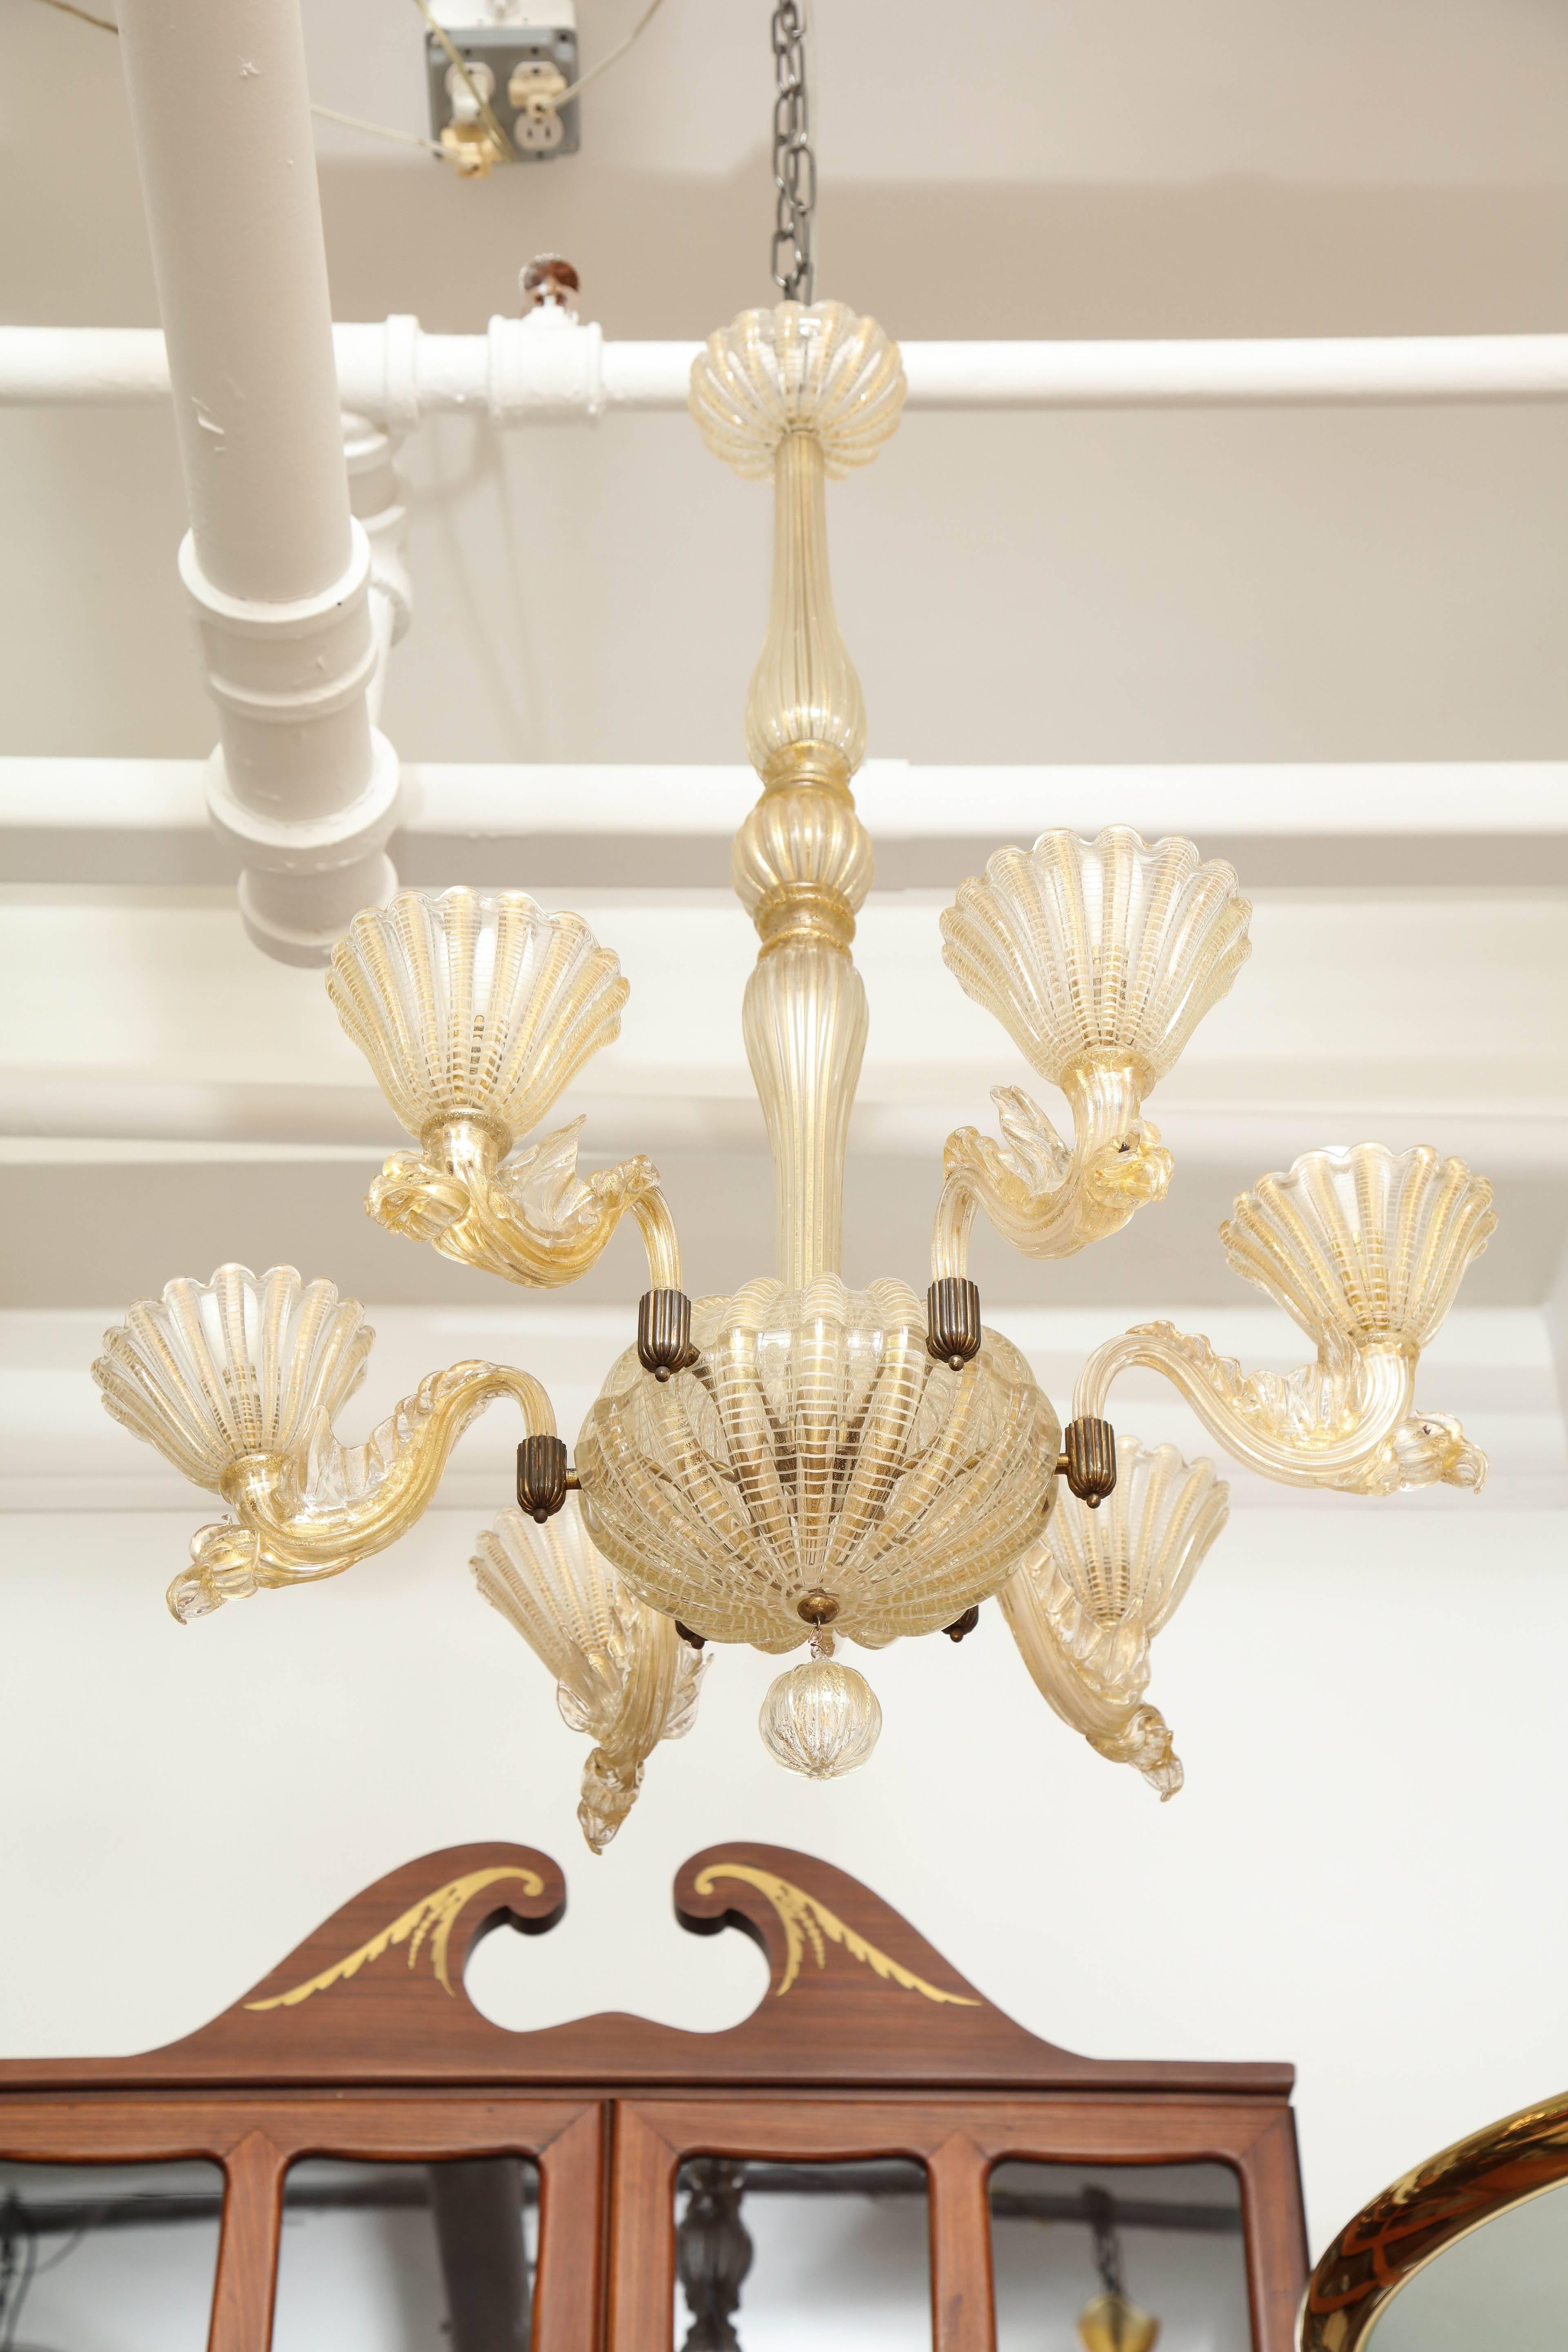 Barovier & Toso chandelier made In Venice 1935 a very unusual model that the arms are in the form of a dragon. Blown glass spiral design in the shades with gold fleck, great quality. Take's 6 incandescent bulbs.

Available for viewing at Fred